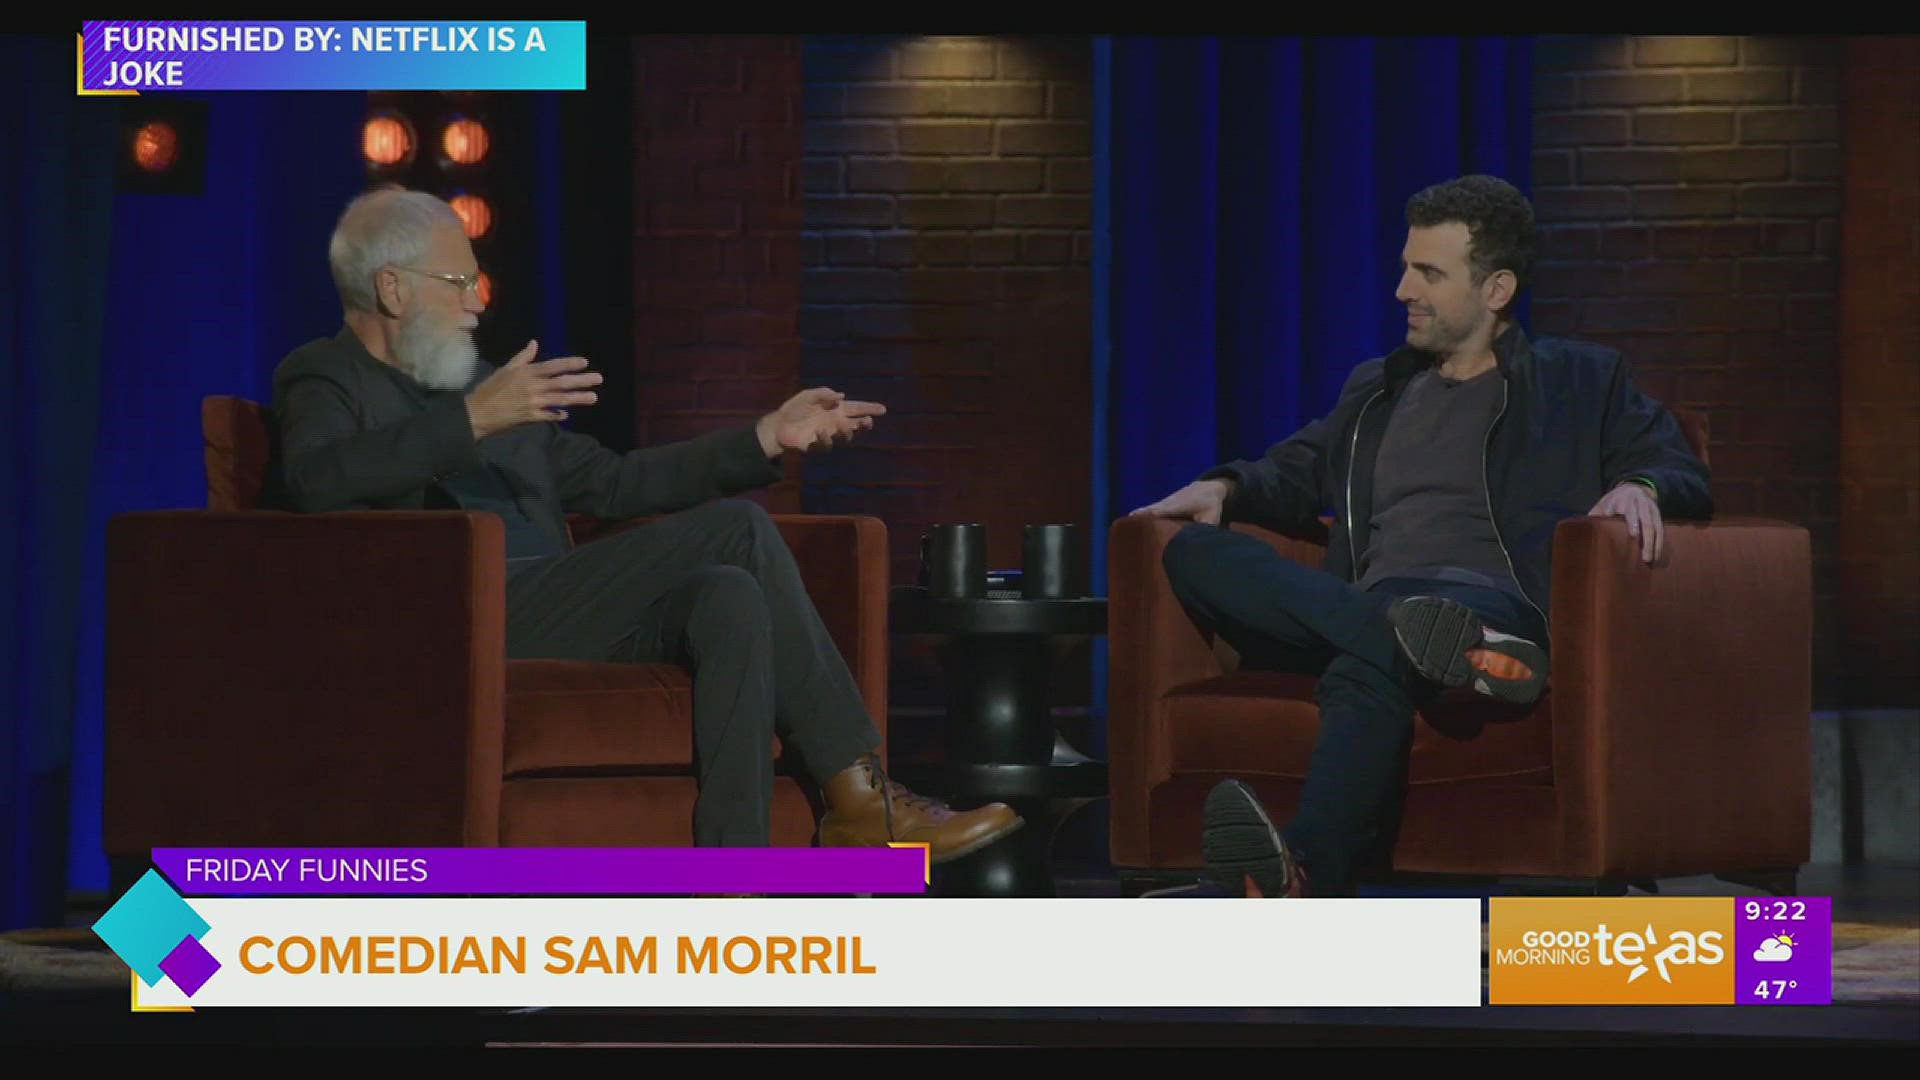 We talk with Sam Morril about his career making people laugh, and his class act tour coming to Dallas.